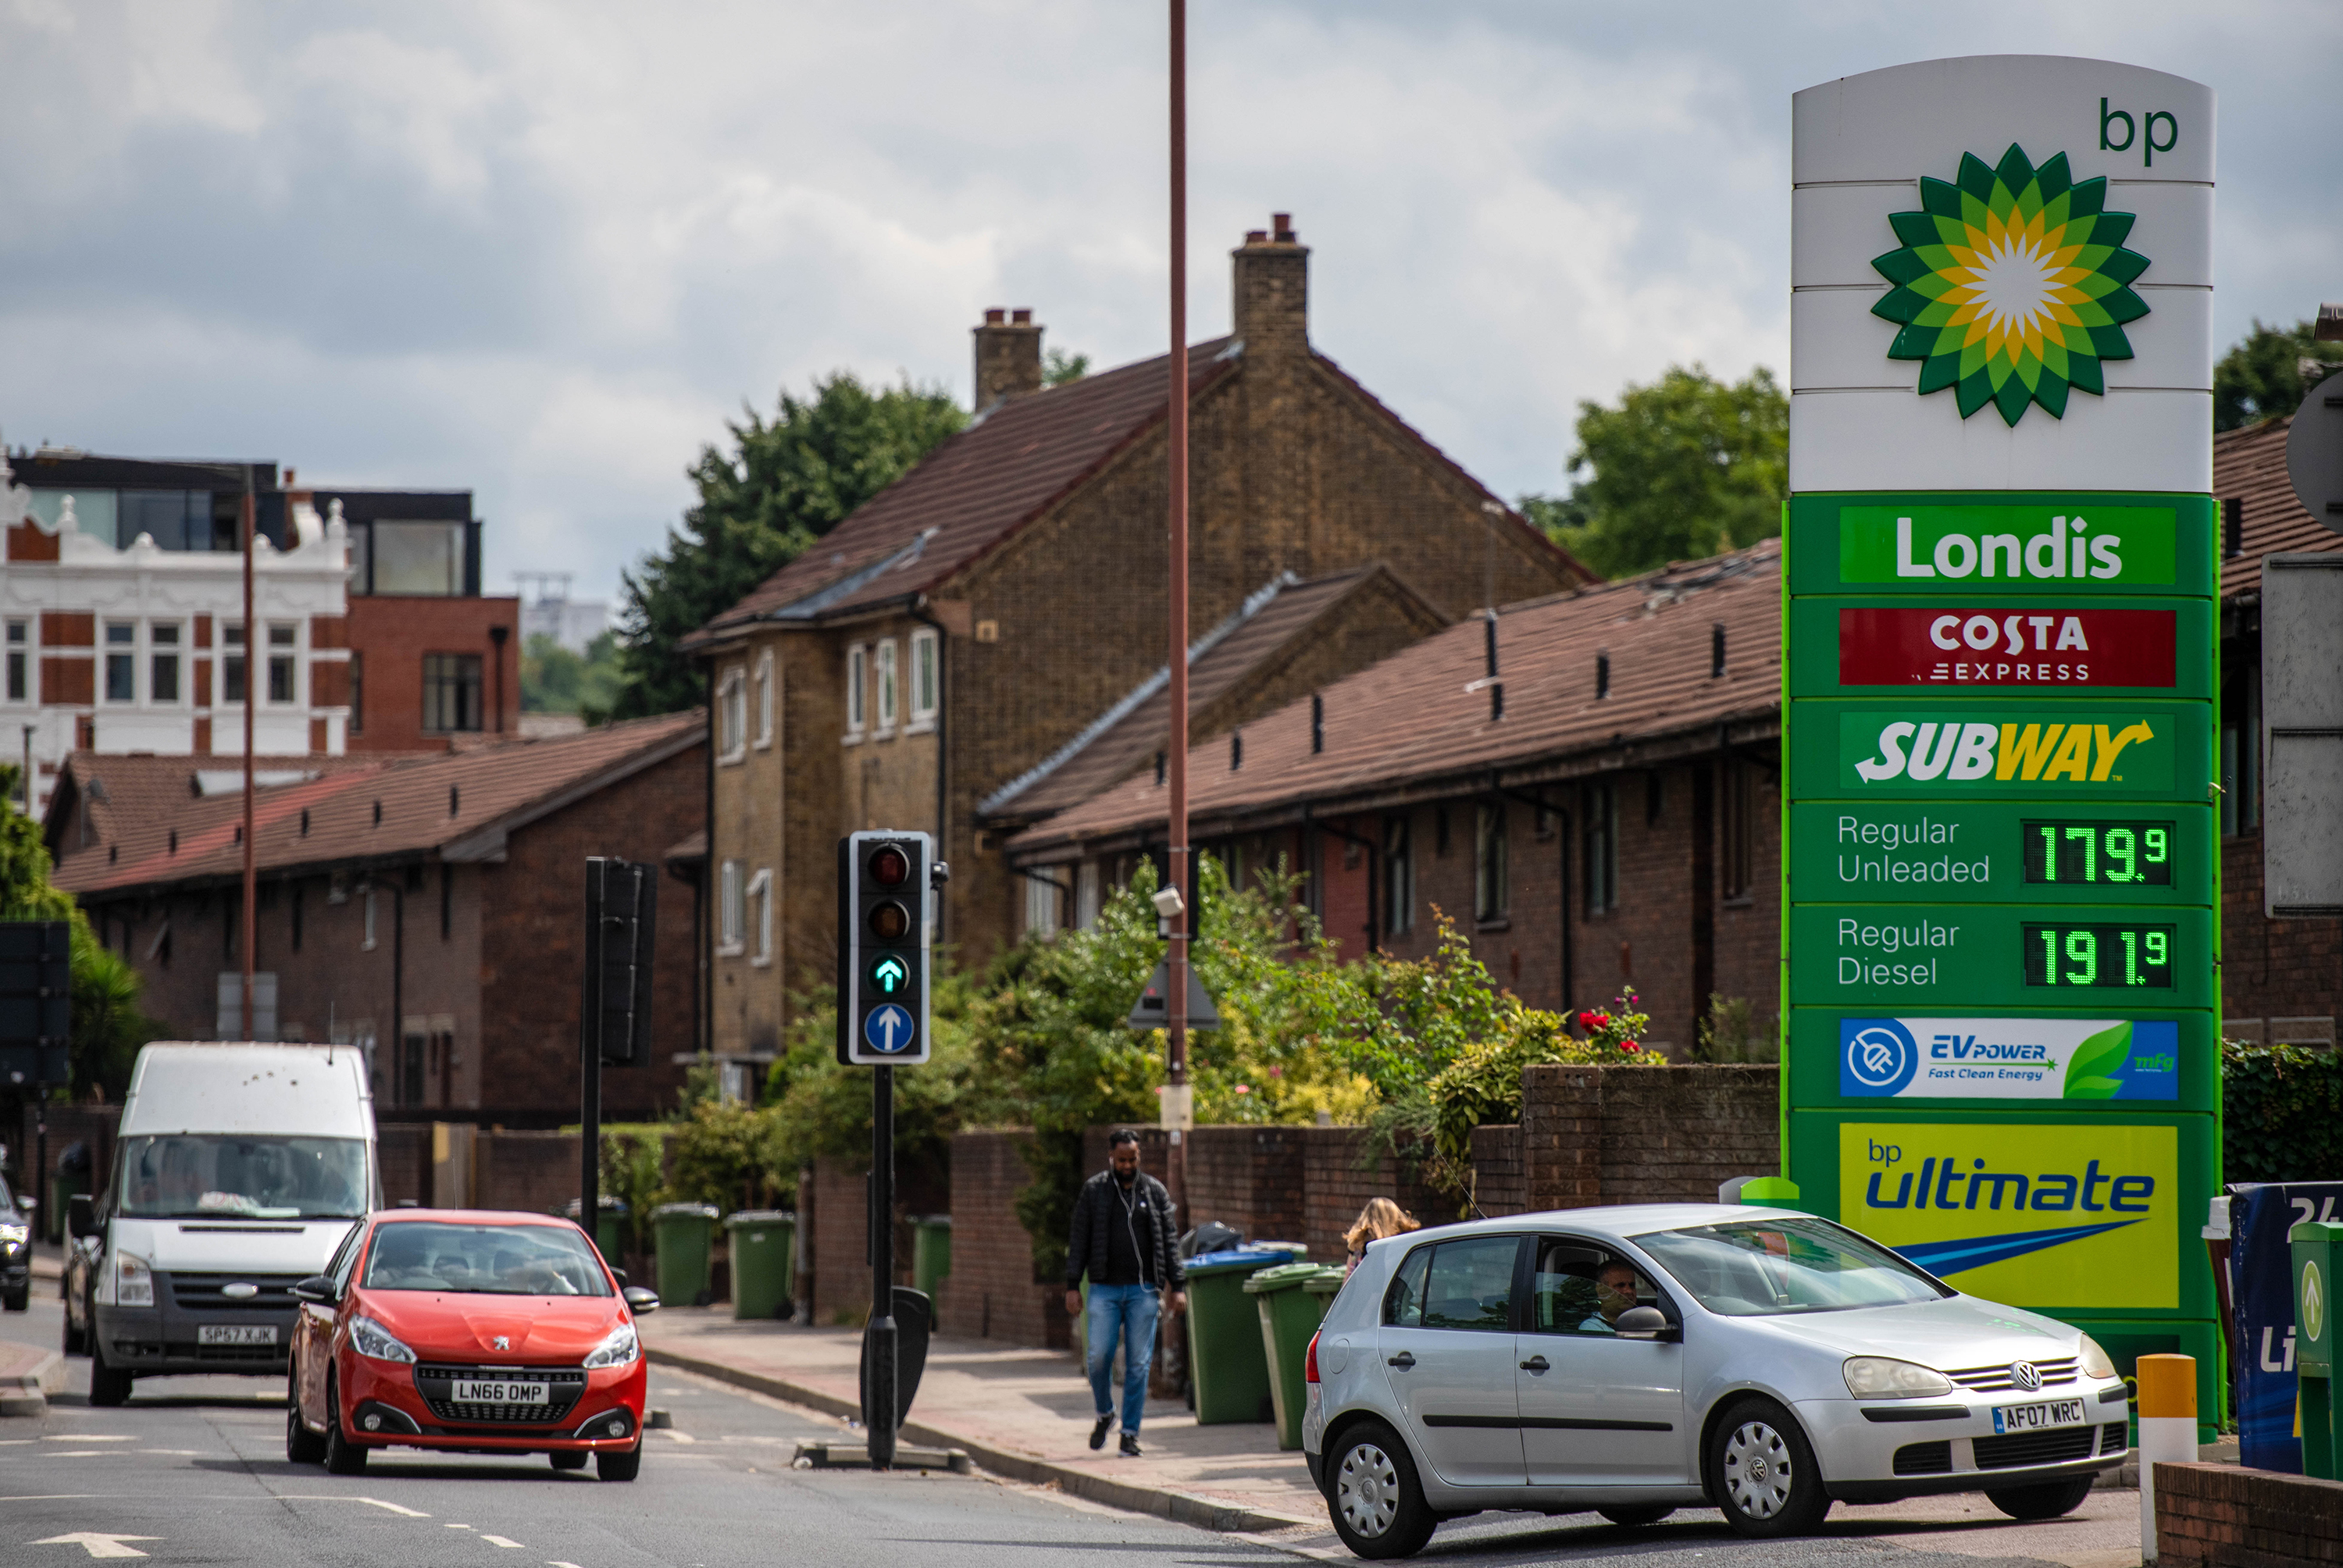 A BP Plc gas station is seen in London, UK on August 1.